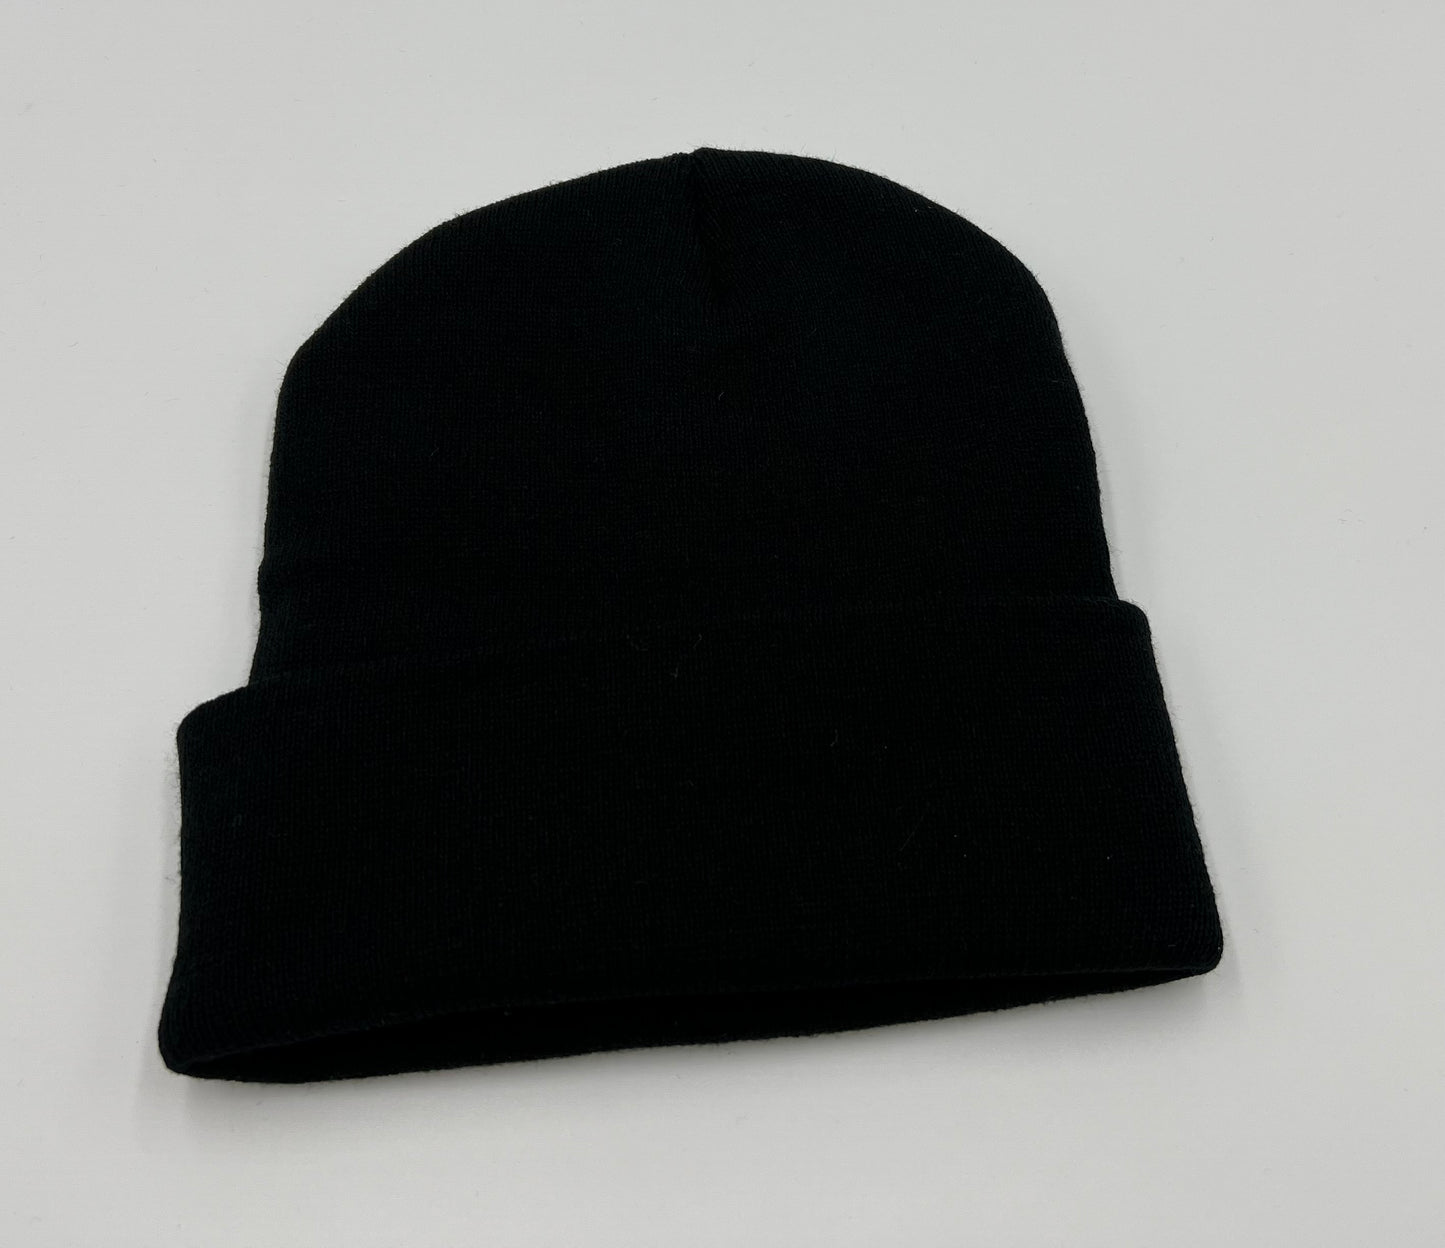 TEQ Embroidered Beanie